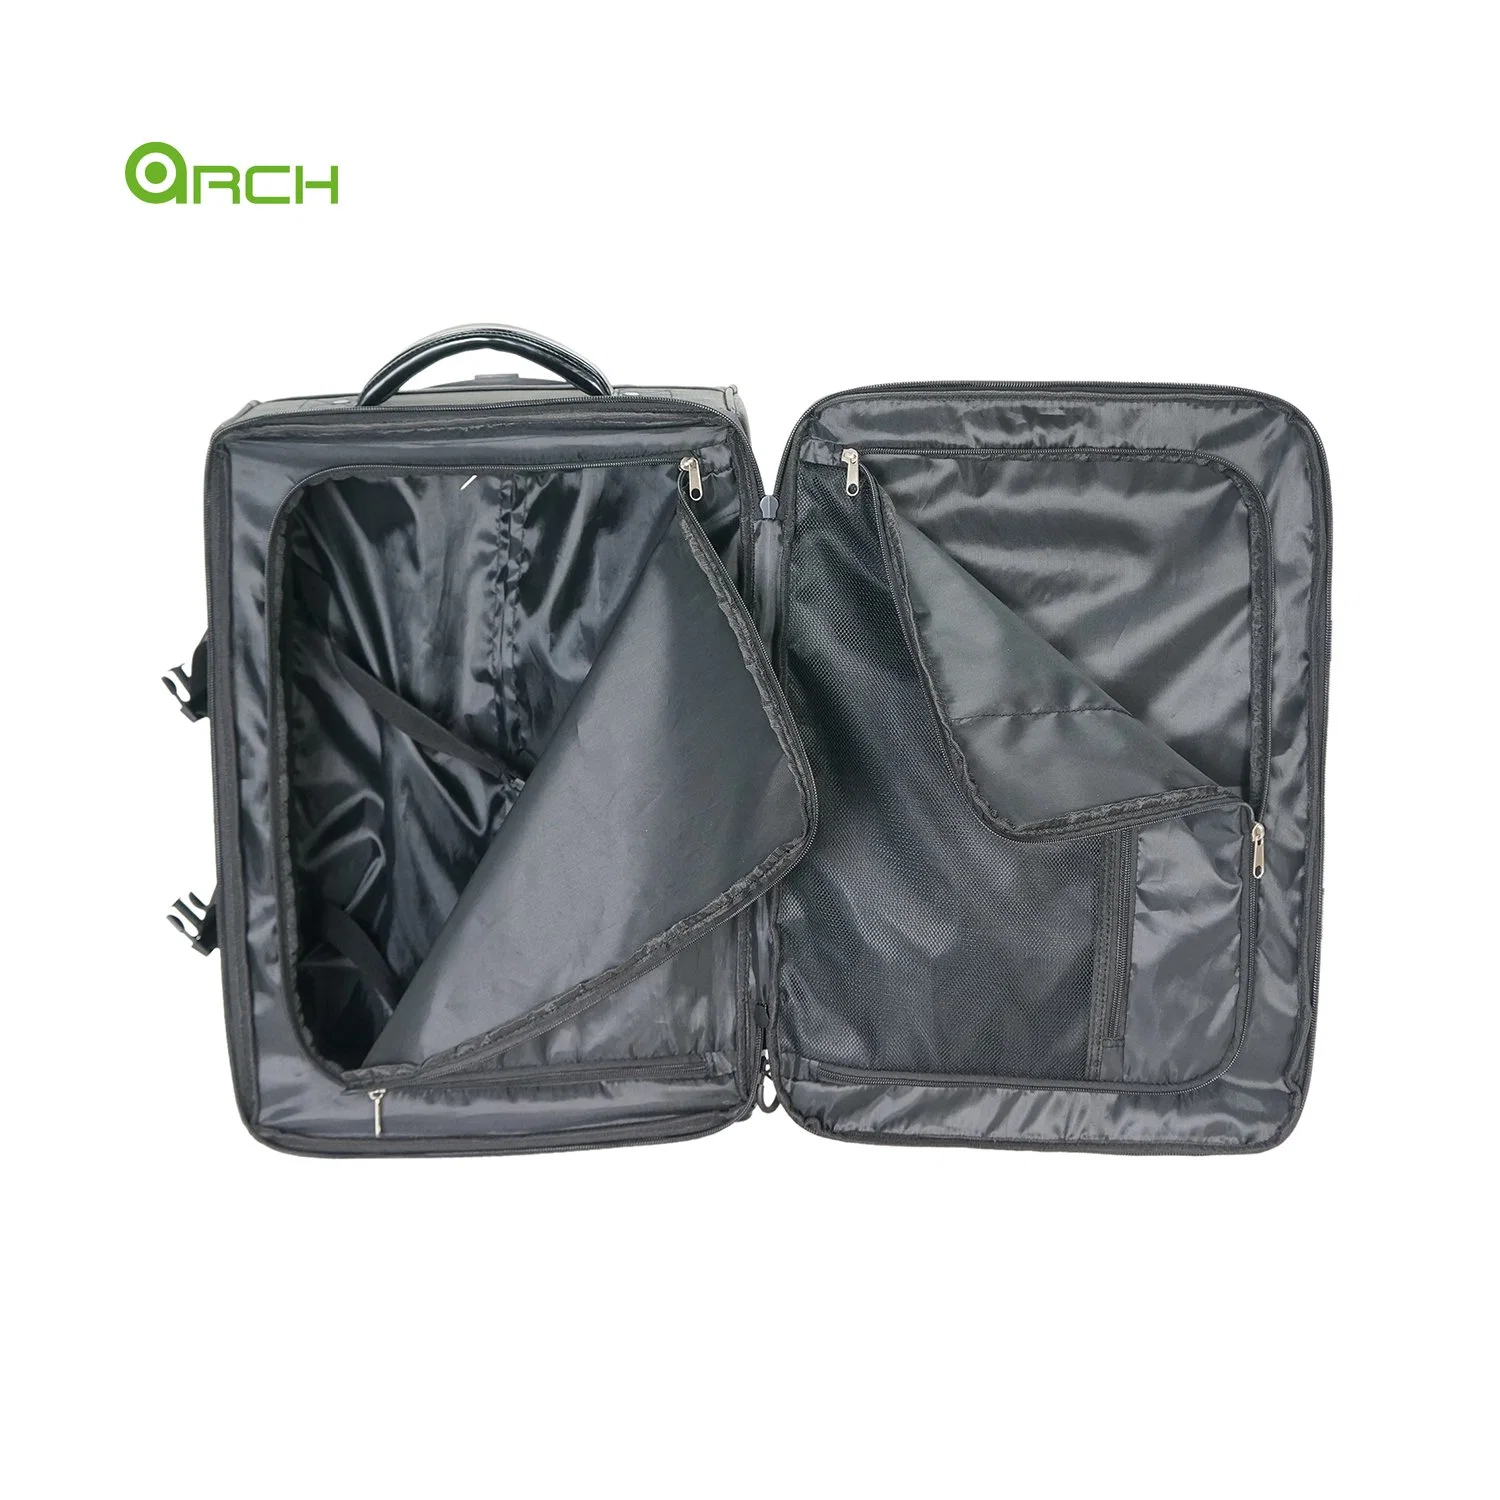 Waterproof Carbon Material Travel Bag Luggage Carry on with Trolley